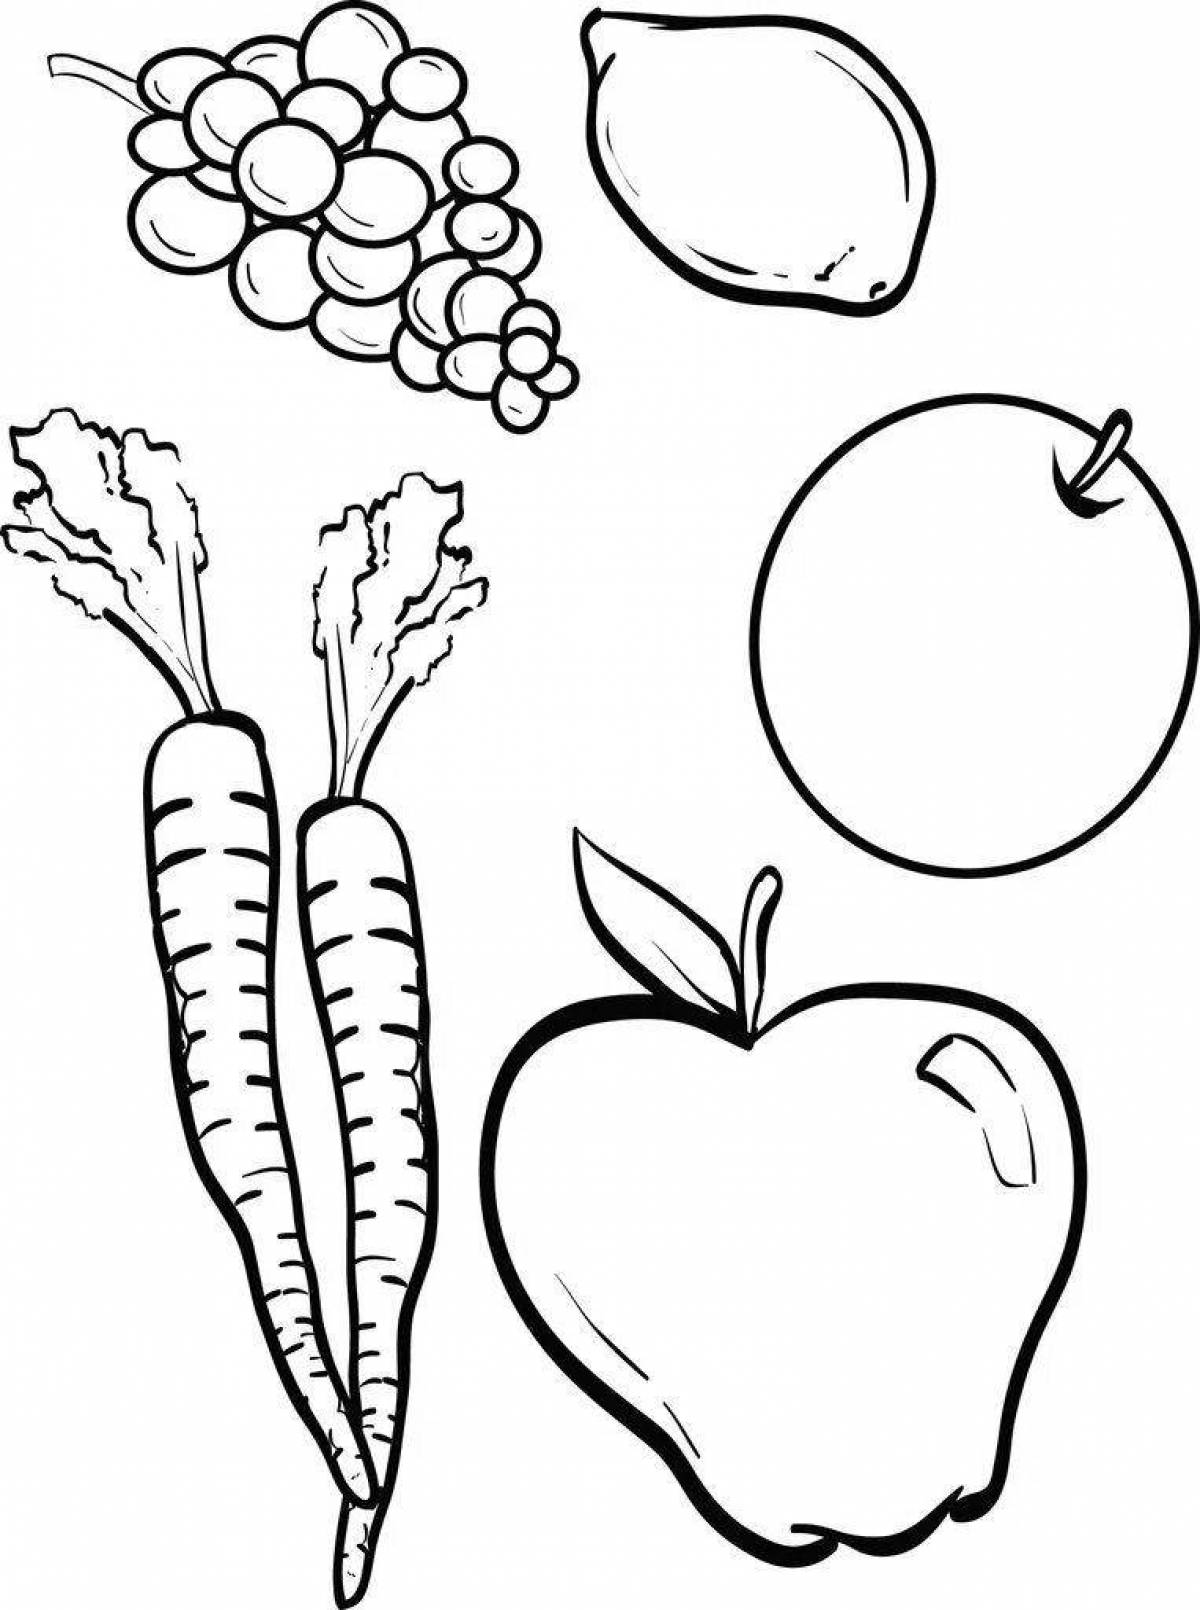 Creative vegetable coloring book for 3-4 year olds